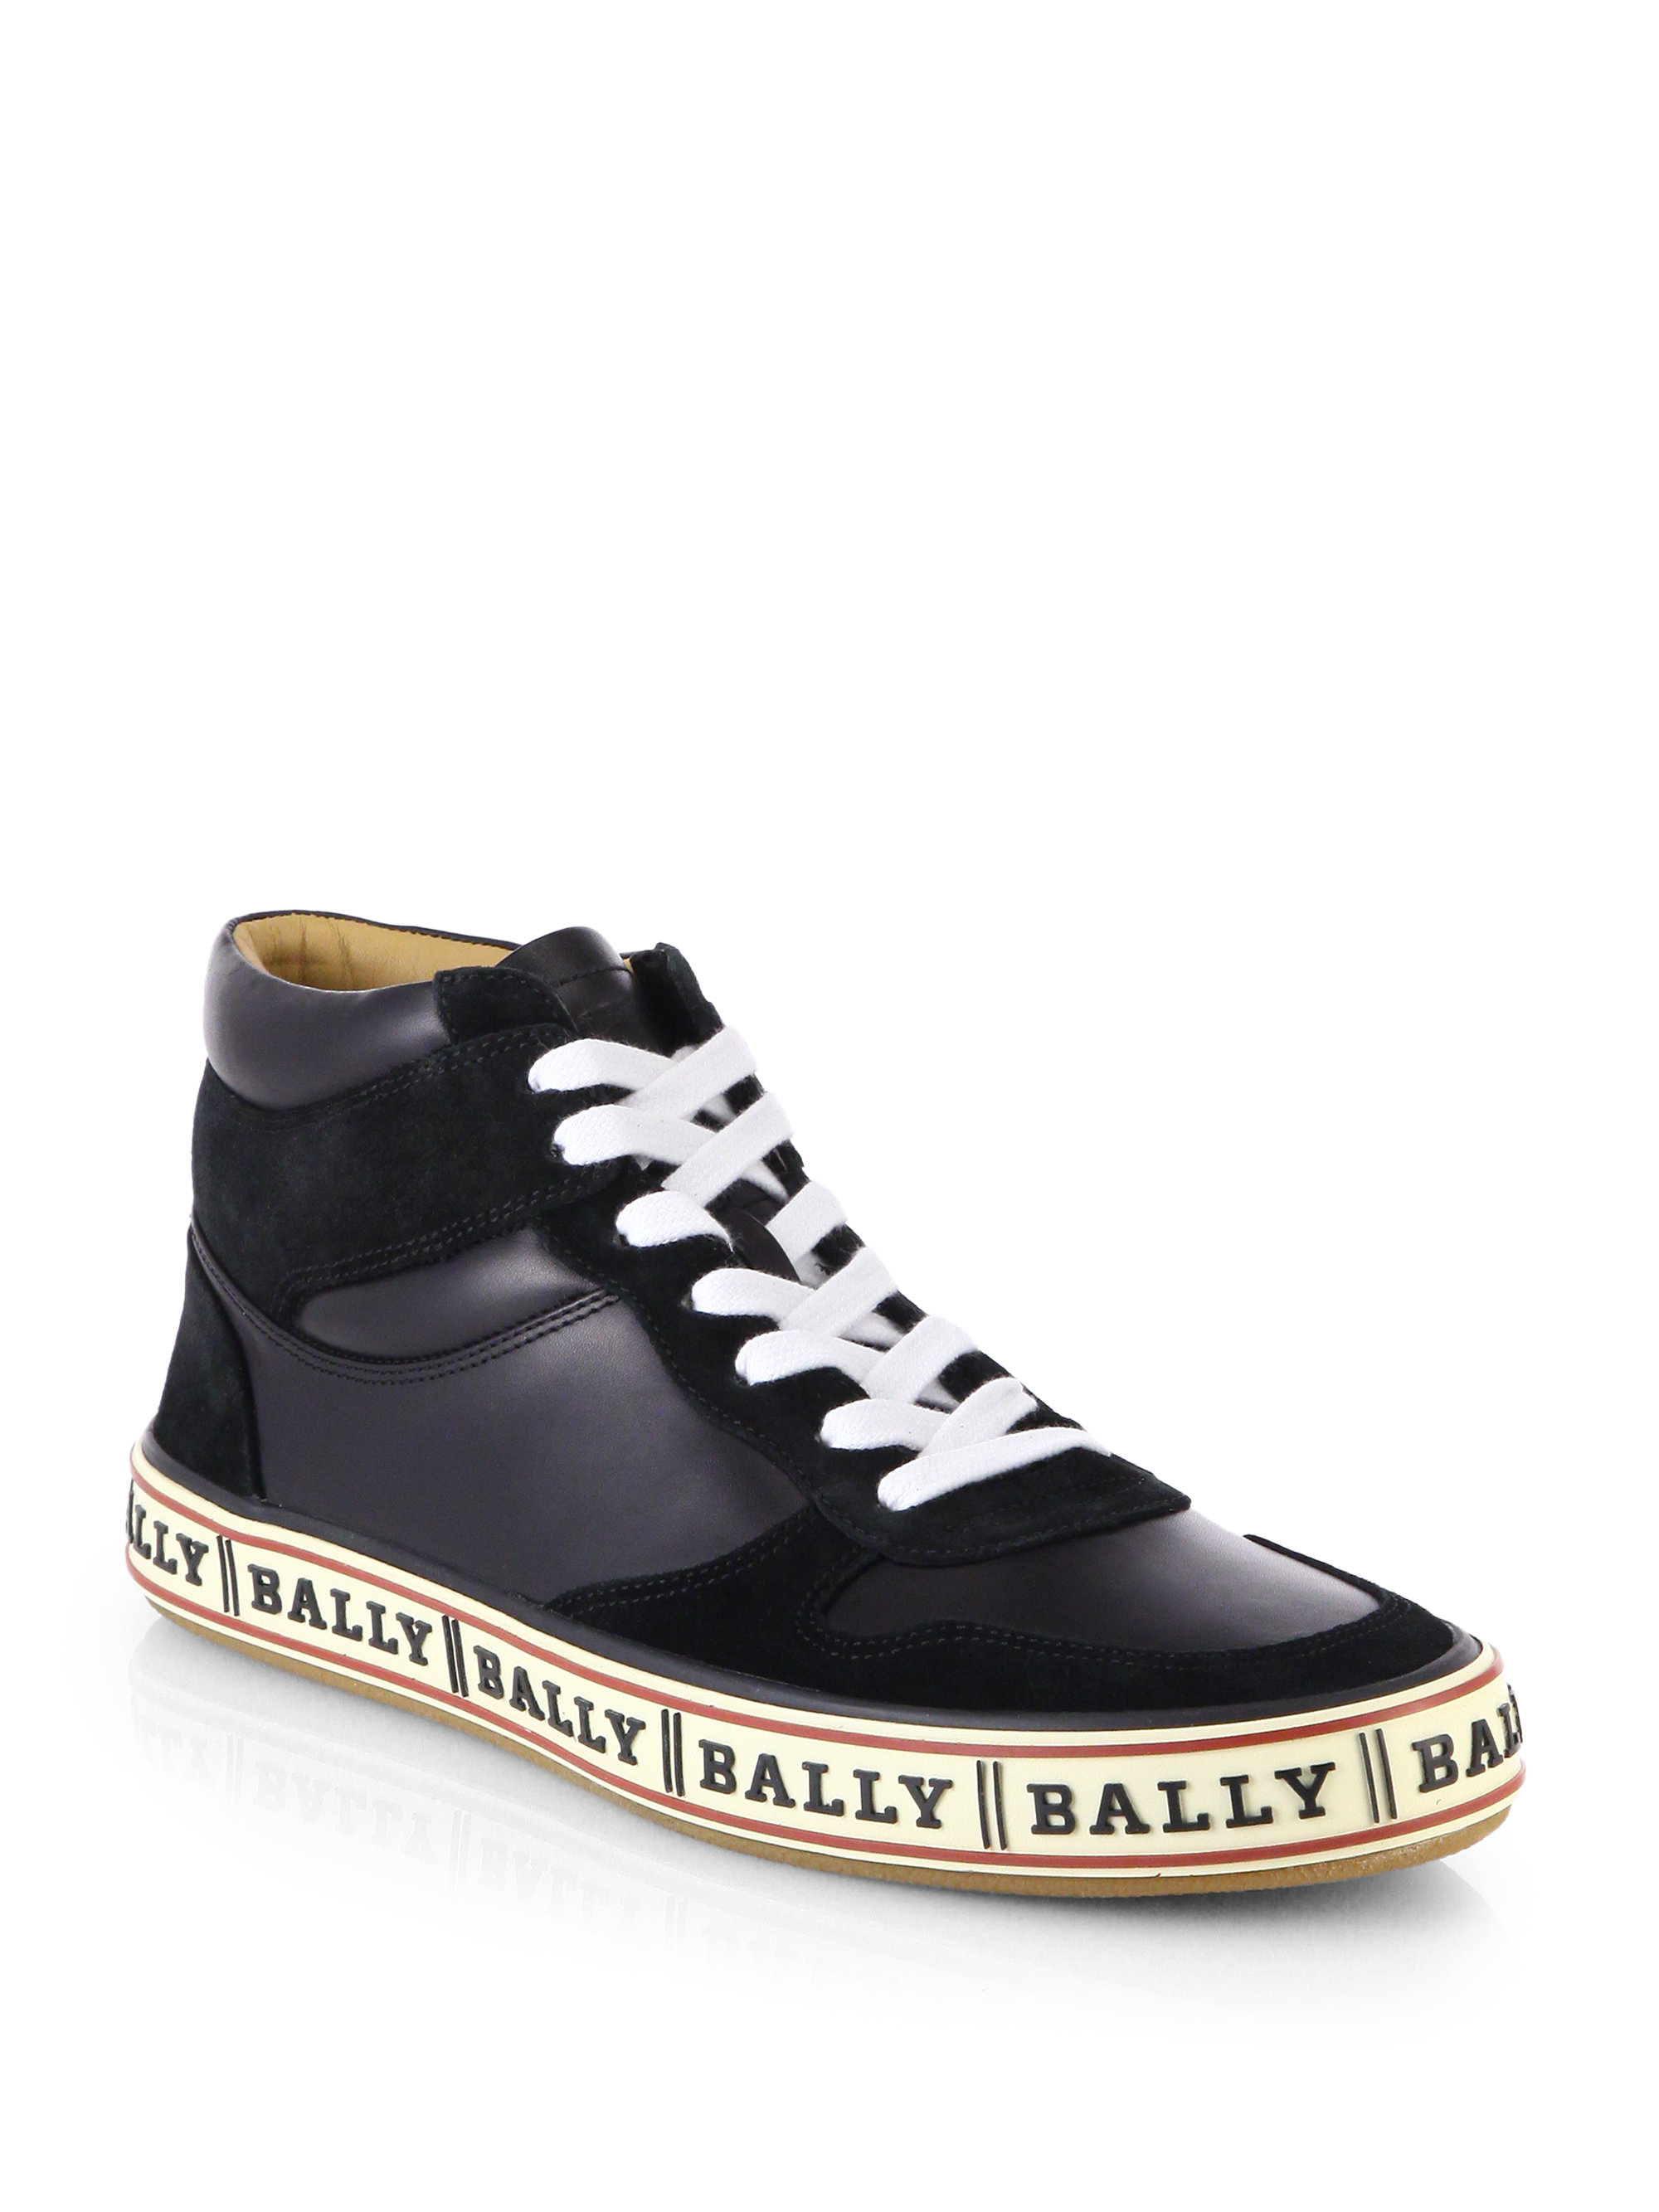 Lyst - Bally Logo-soled Leather High-top Sneakers in Black for Men